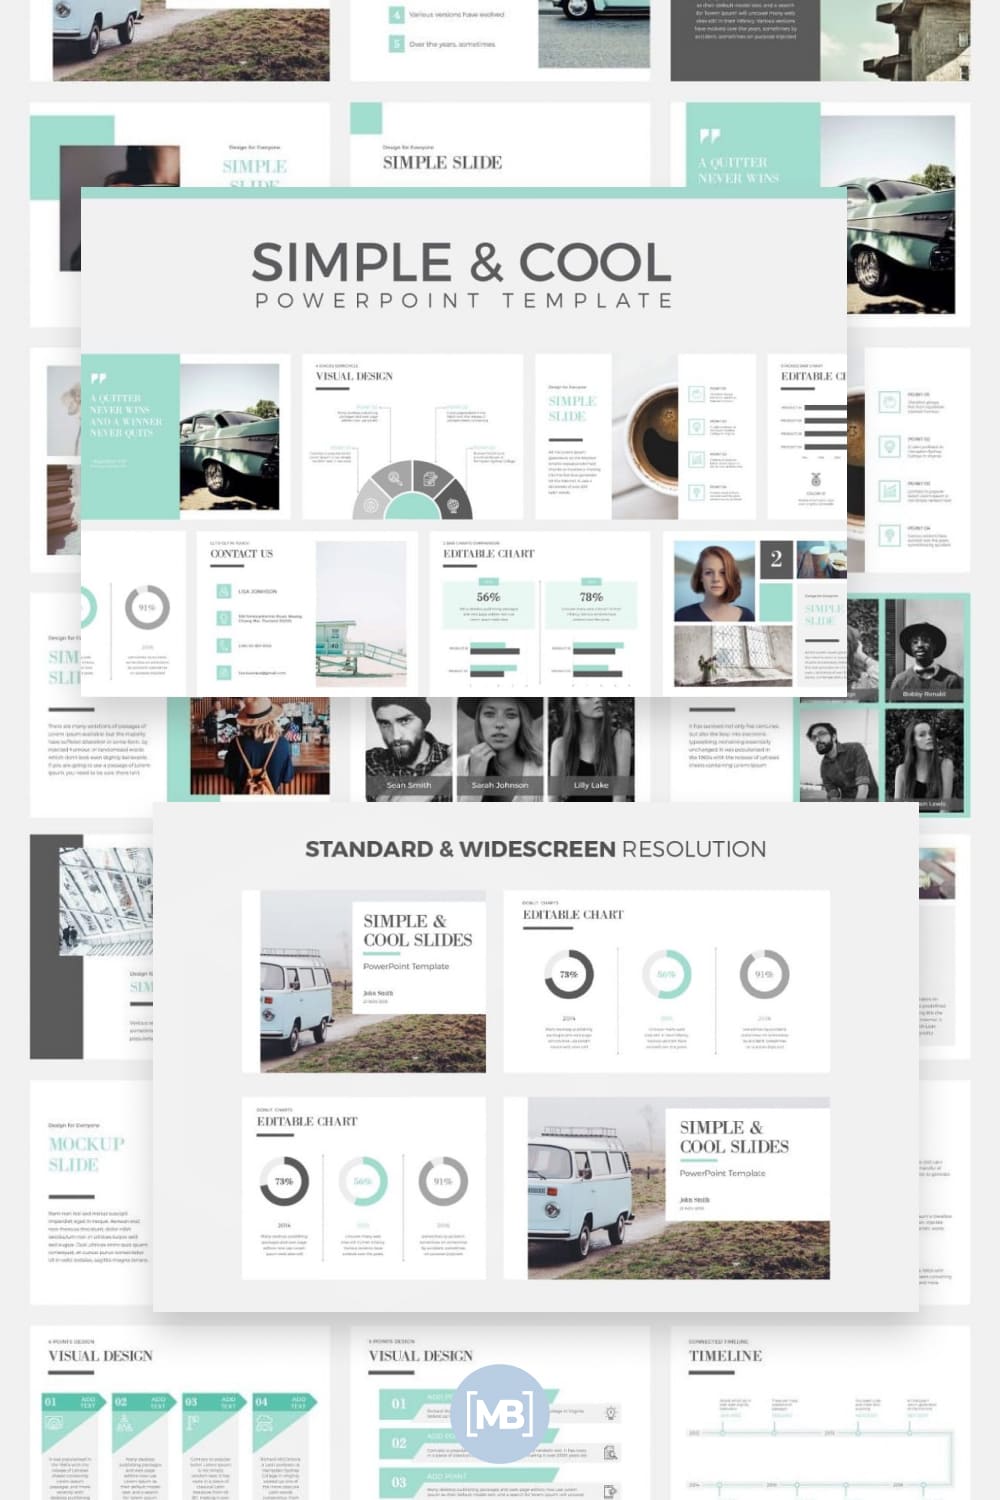 Simple and cool powerpoint template.